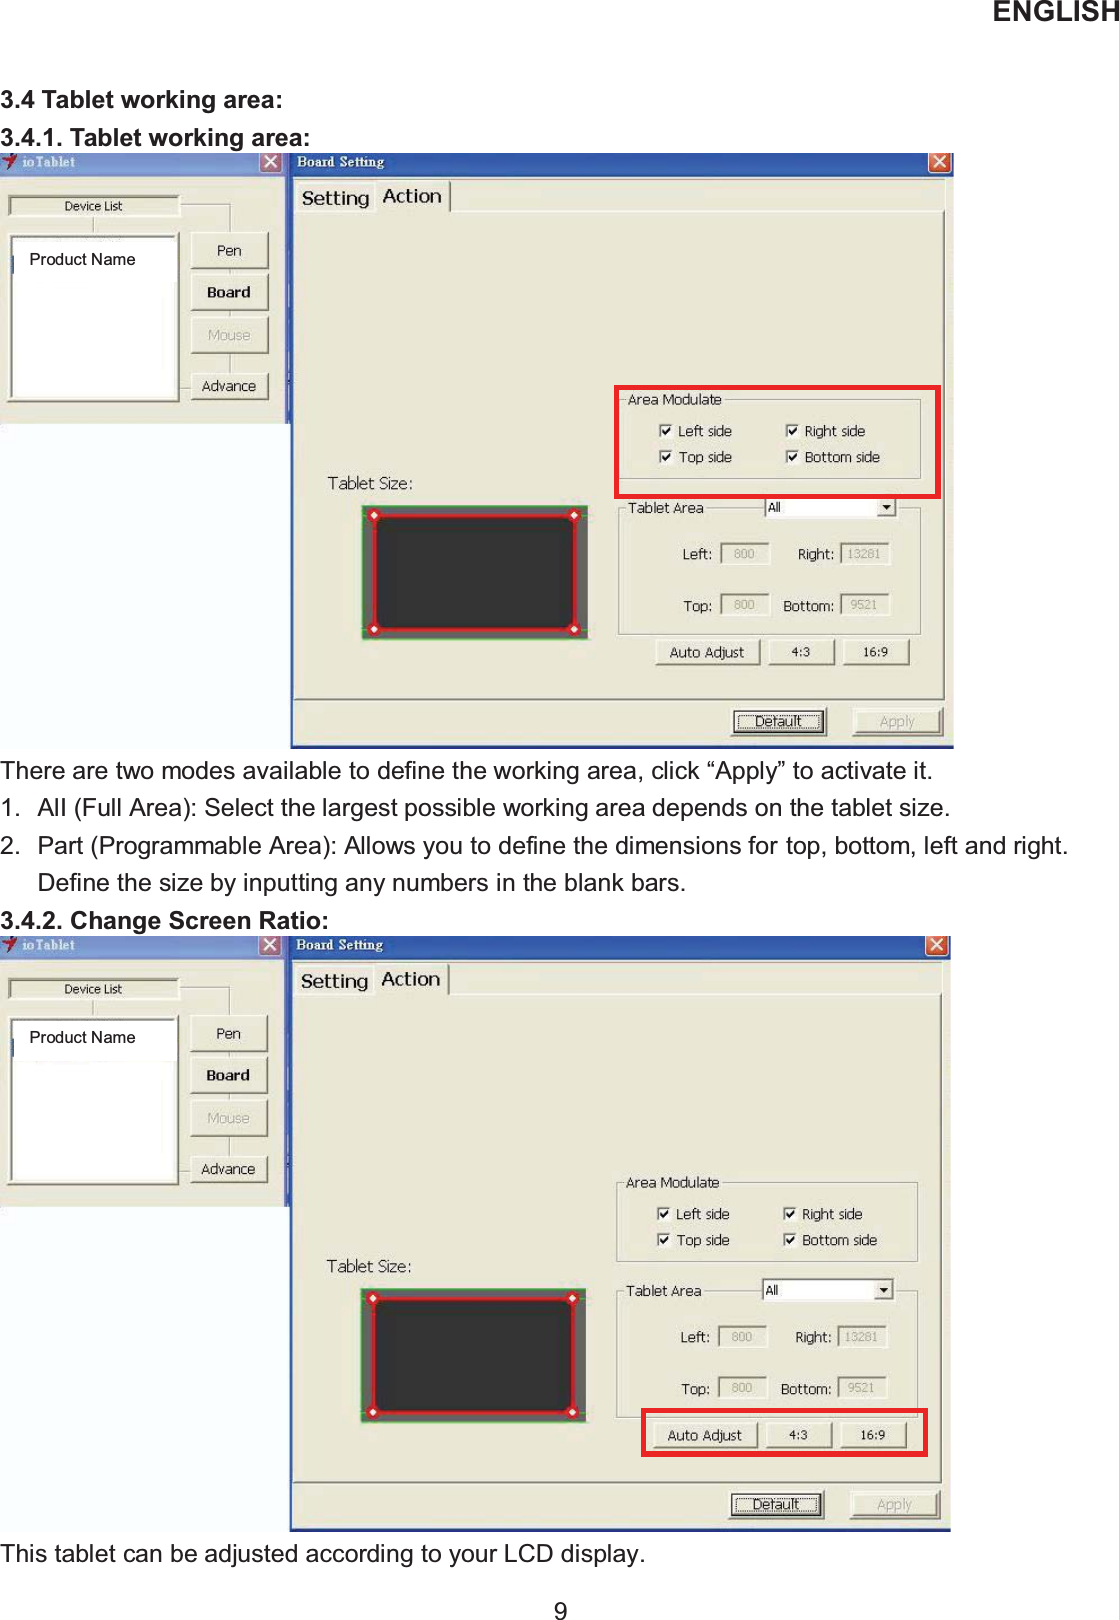 ENGLISH  9   3.4 Tablet working area: 3.4.1. Tablet working area:  There are two modes available to define the working area, click “Apply” to activate it. 1.  AlI (Full Area): Select the largest possible working area depends on the tablet size. 2.  Part (Programmable Area): Allows you to define the dimensions for top, bottom, left and right. Define the size by inputting any numbers in the blank bars. 3.4.2. Change Screen Ratio:  This tablet can be adjusted according to your LCD display. Product Name Product Name 